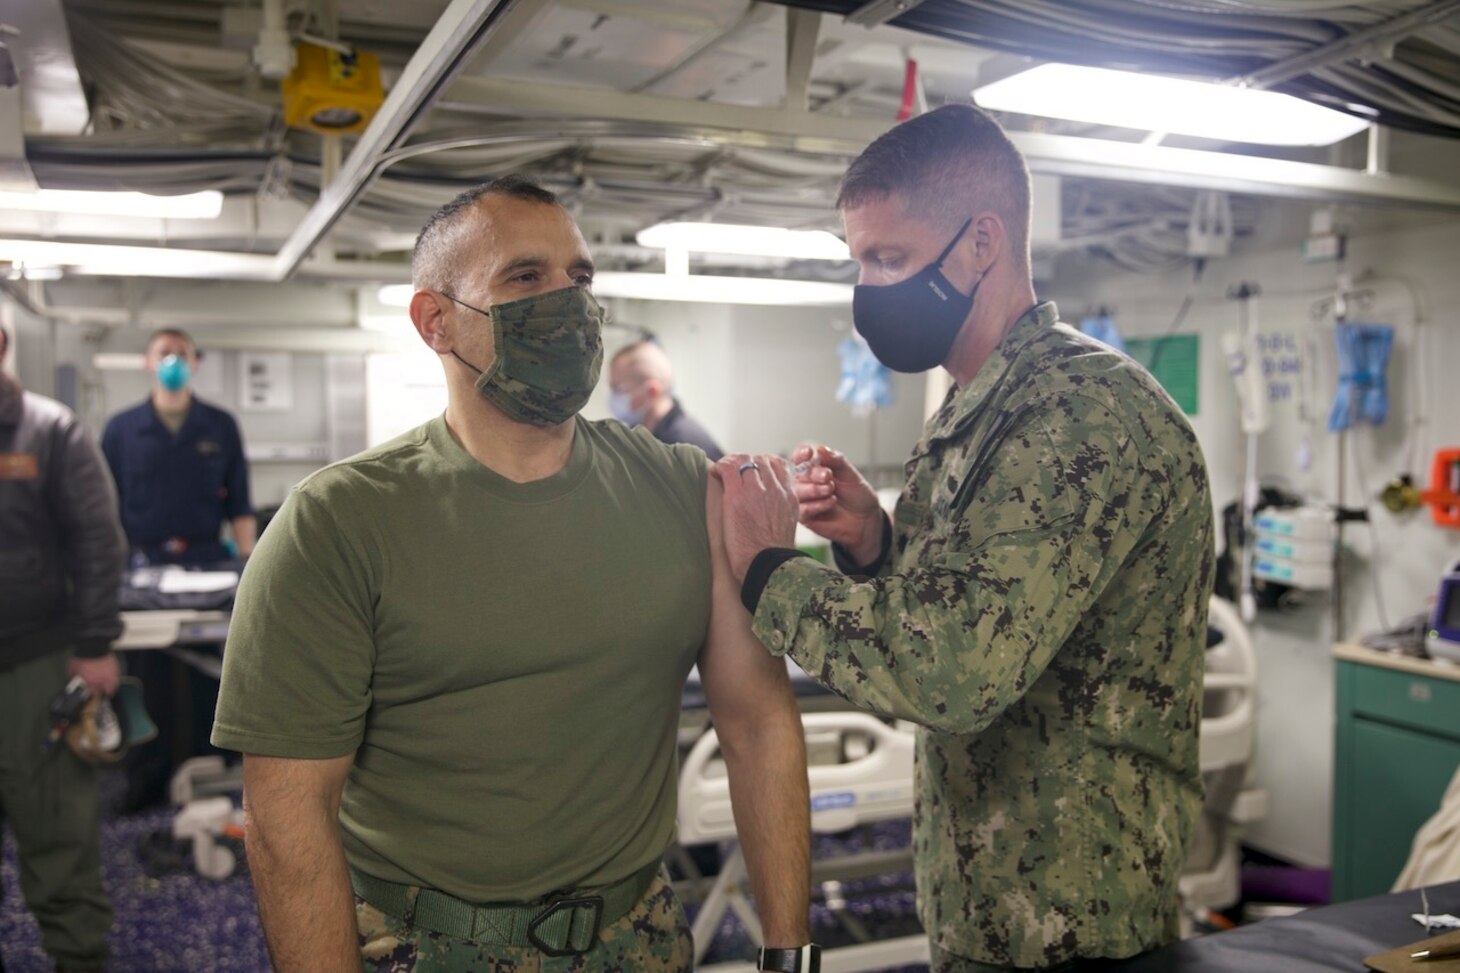 Col. Brian Duplessis, deputy commander, Expeditionary Strike Group (ESG) 2, receives the COVID-19 vaccination aboard the amphibious transport dock ship USS San Antonio (LPD 17), Jan. 11, 2021.